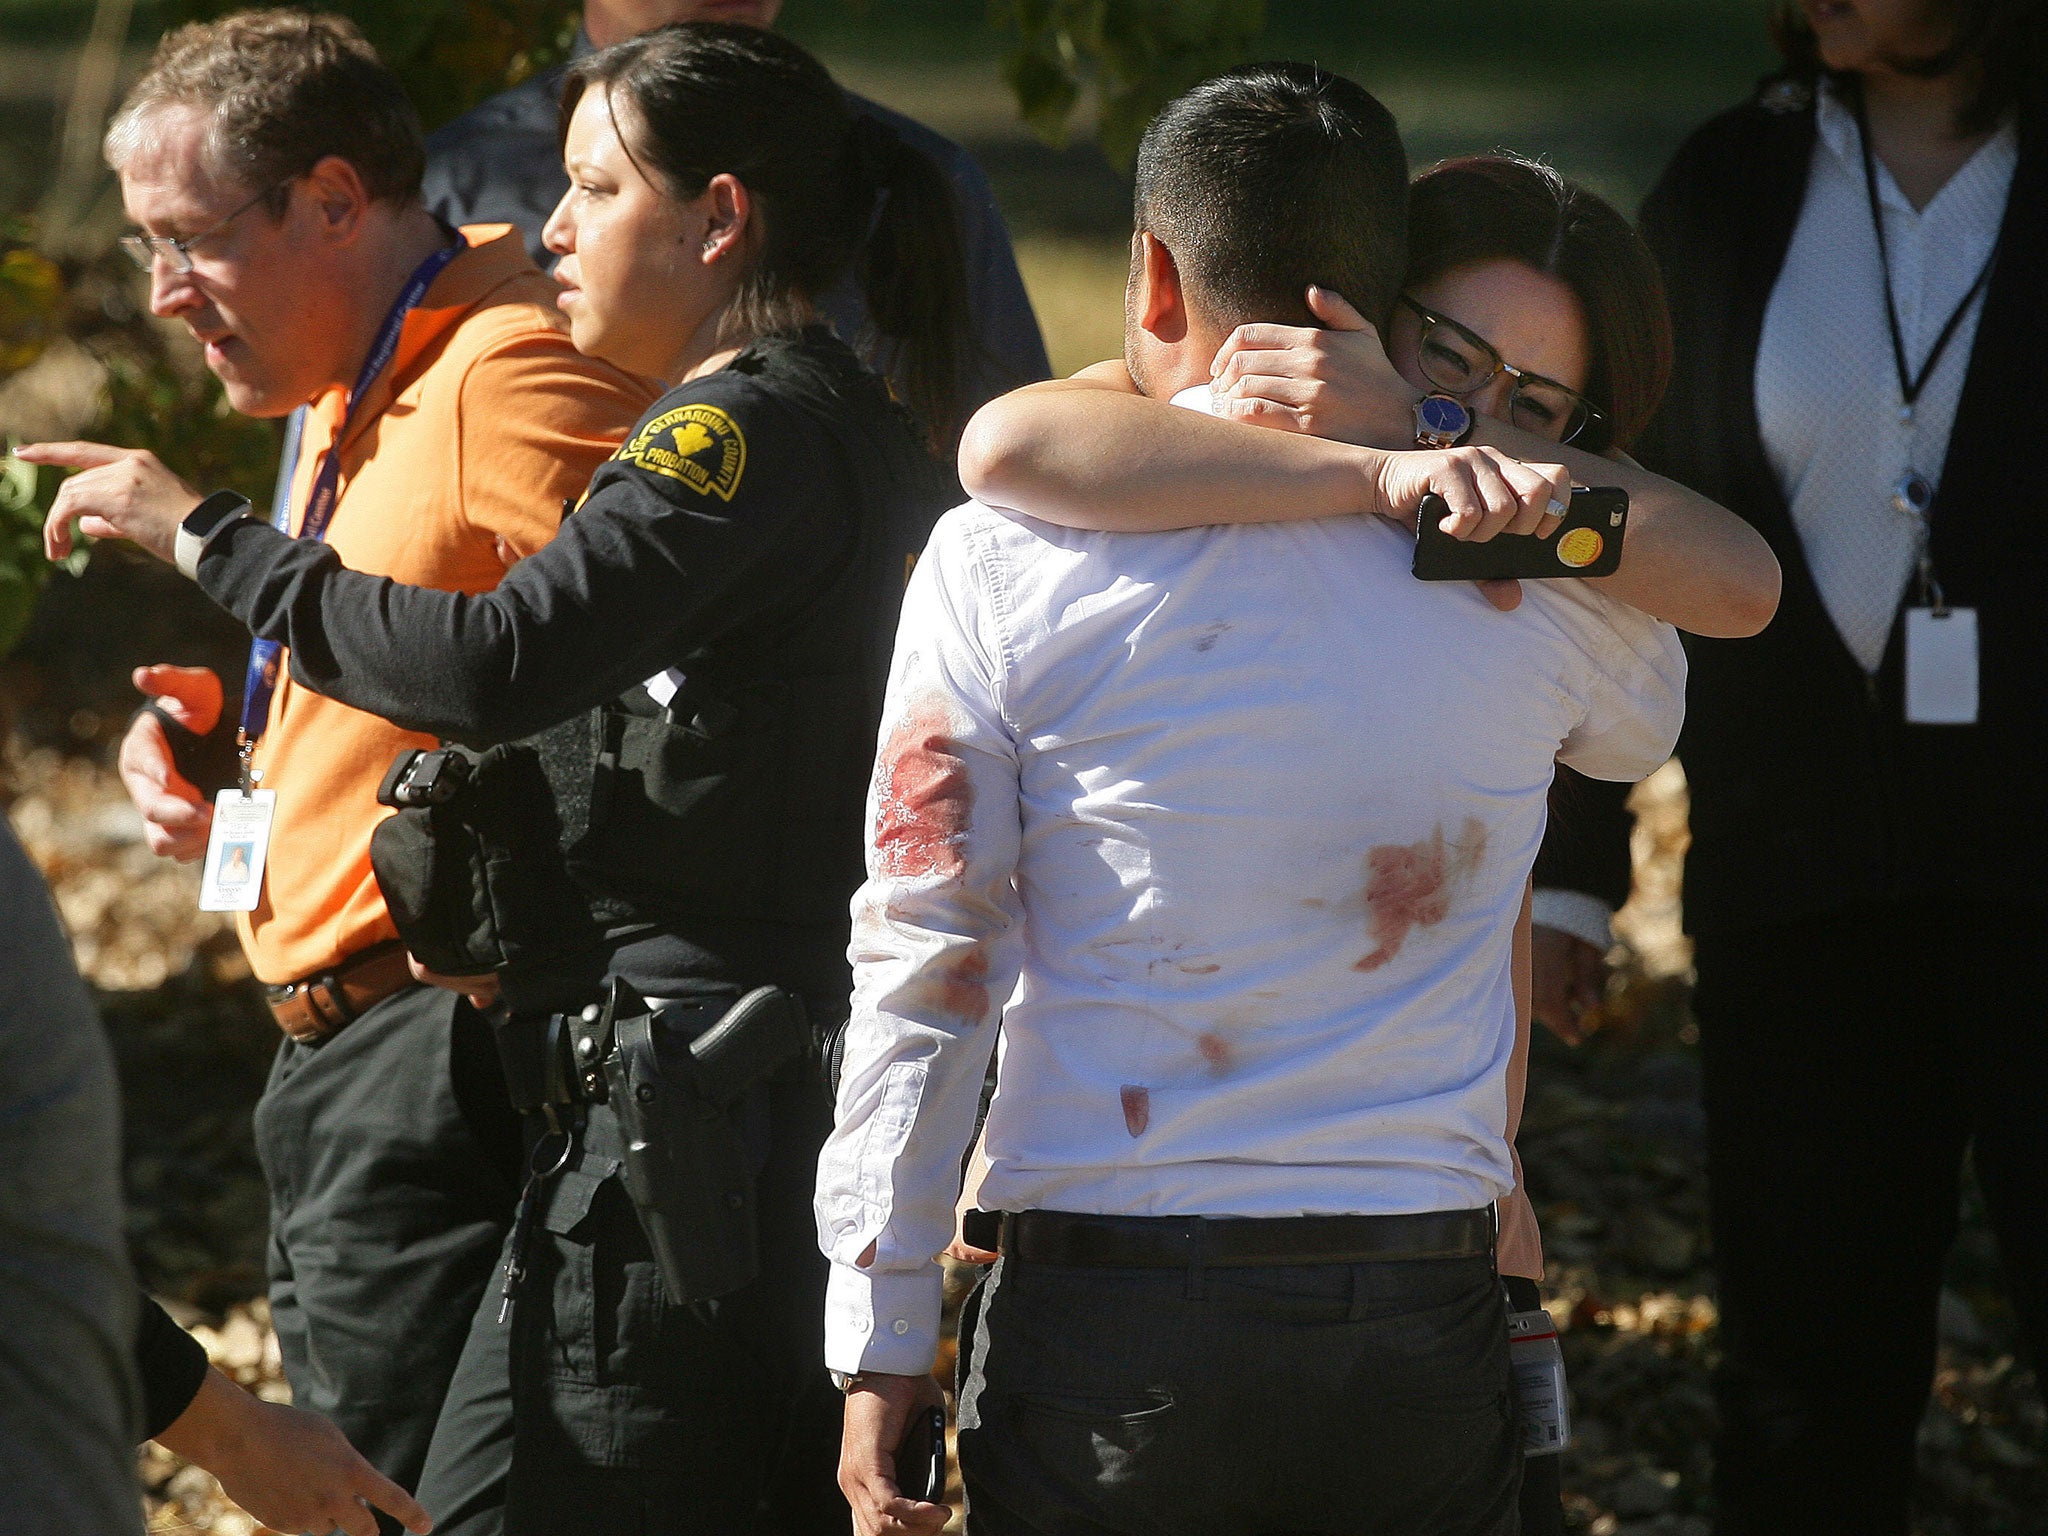 Survivors of the shooting in its aftermath